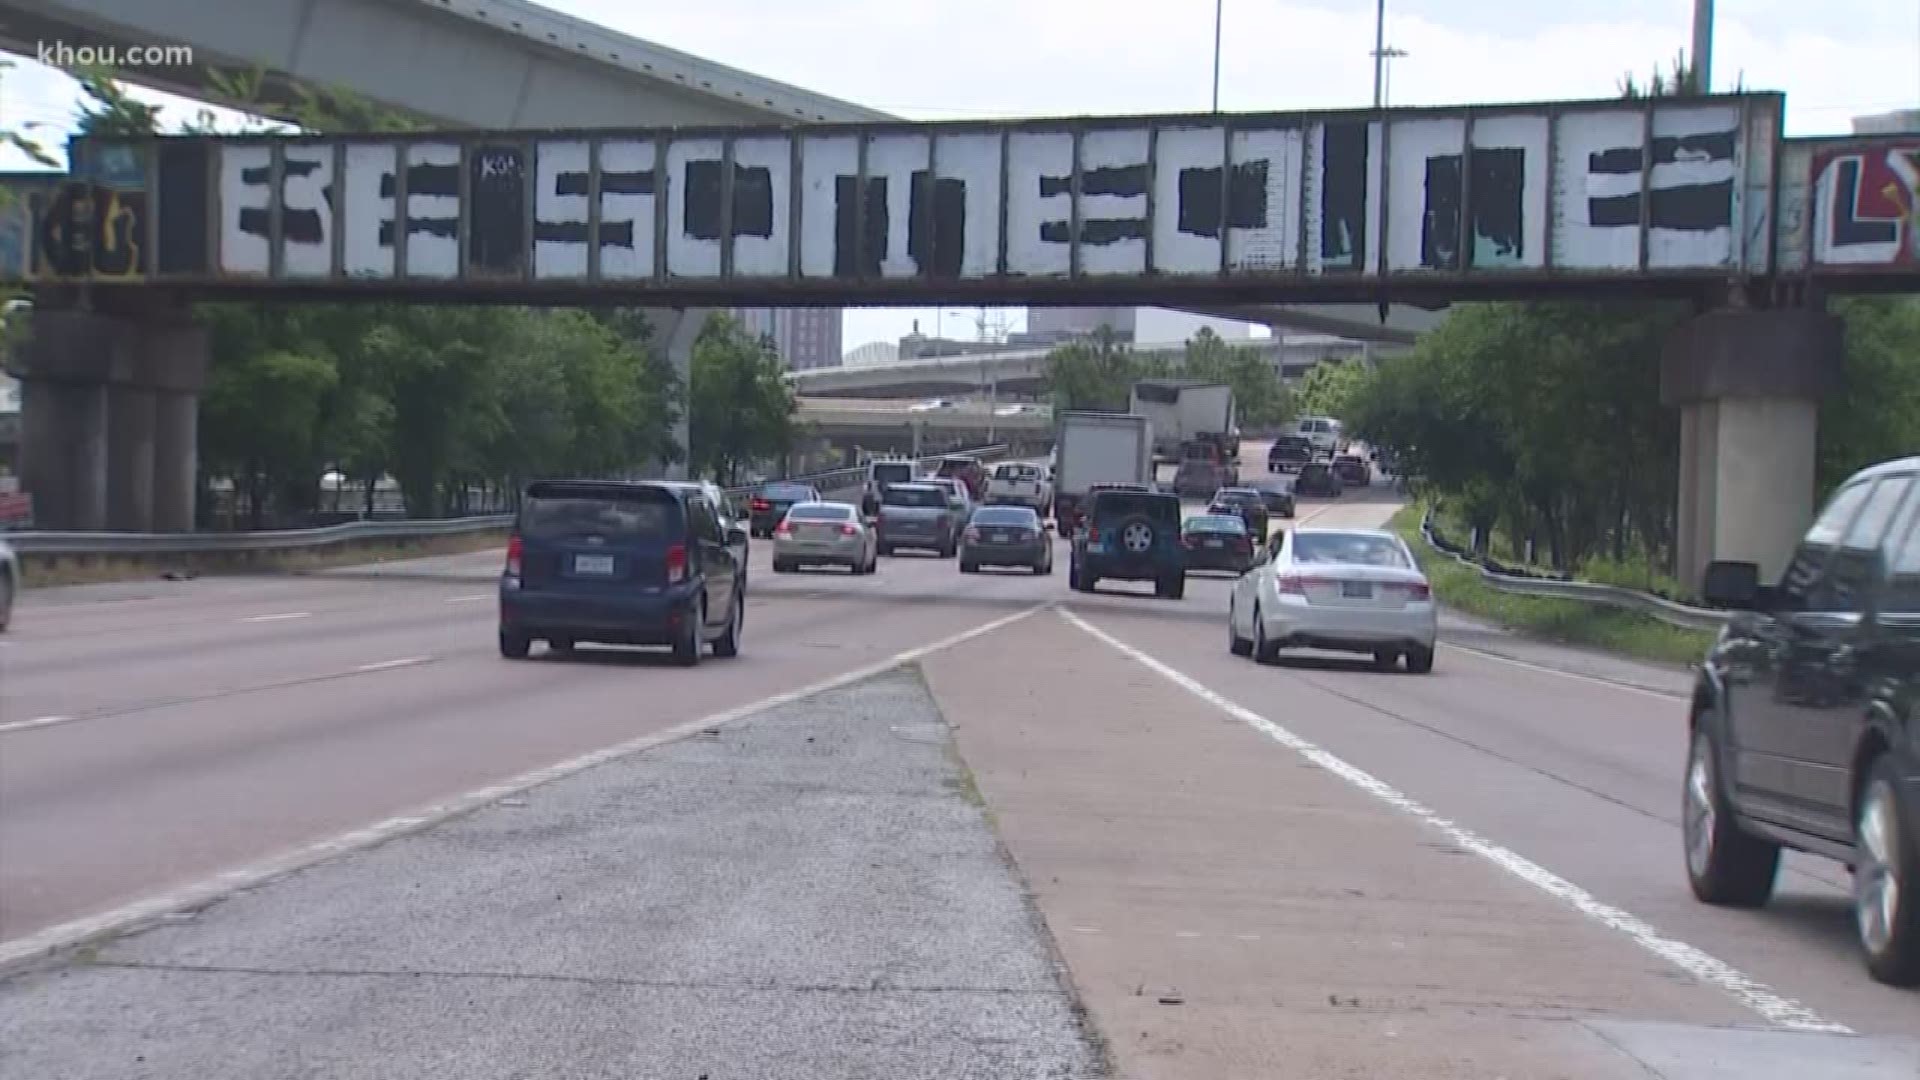 Who Keeps Painting 'Be Someone' on a Prominent Houston Bridge? - WSJ